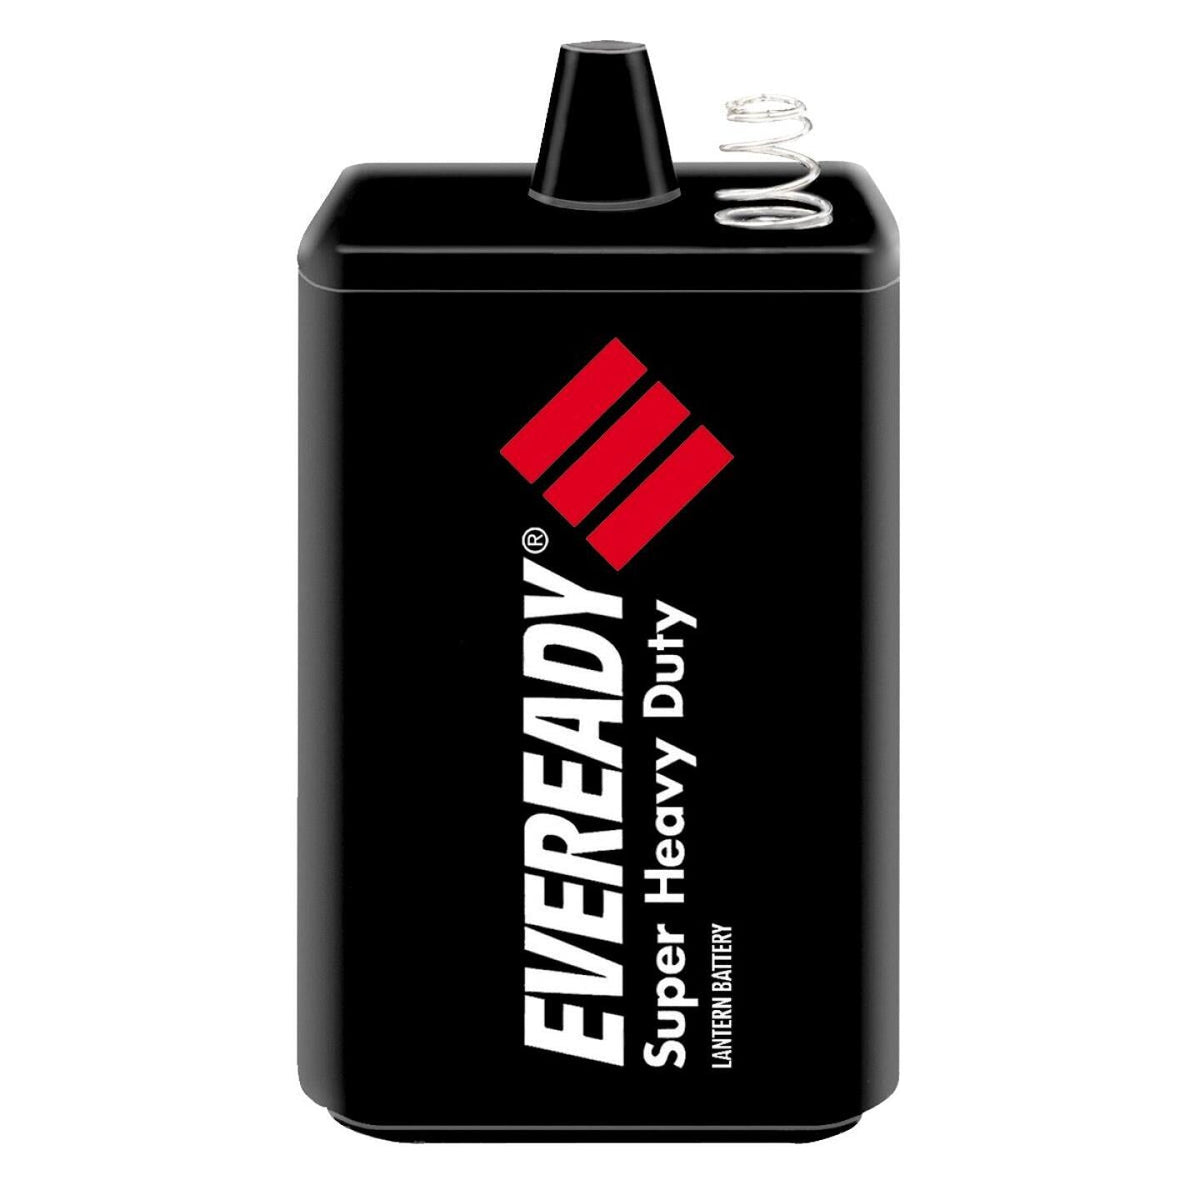 Eveready 6V Spring Terminal Zinc Lantern Battery - Fort Mitchell, AL - Fort  Mitchell Trading Post & Hardware